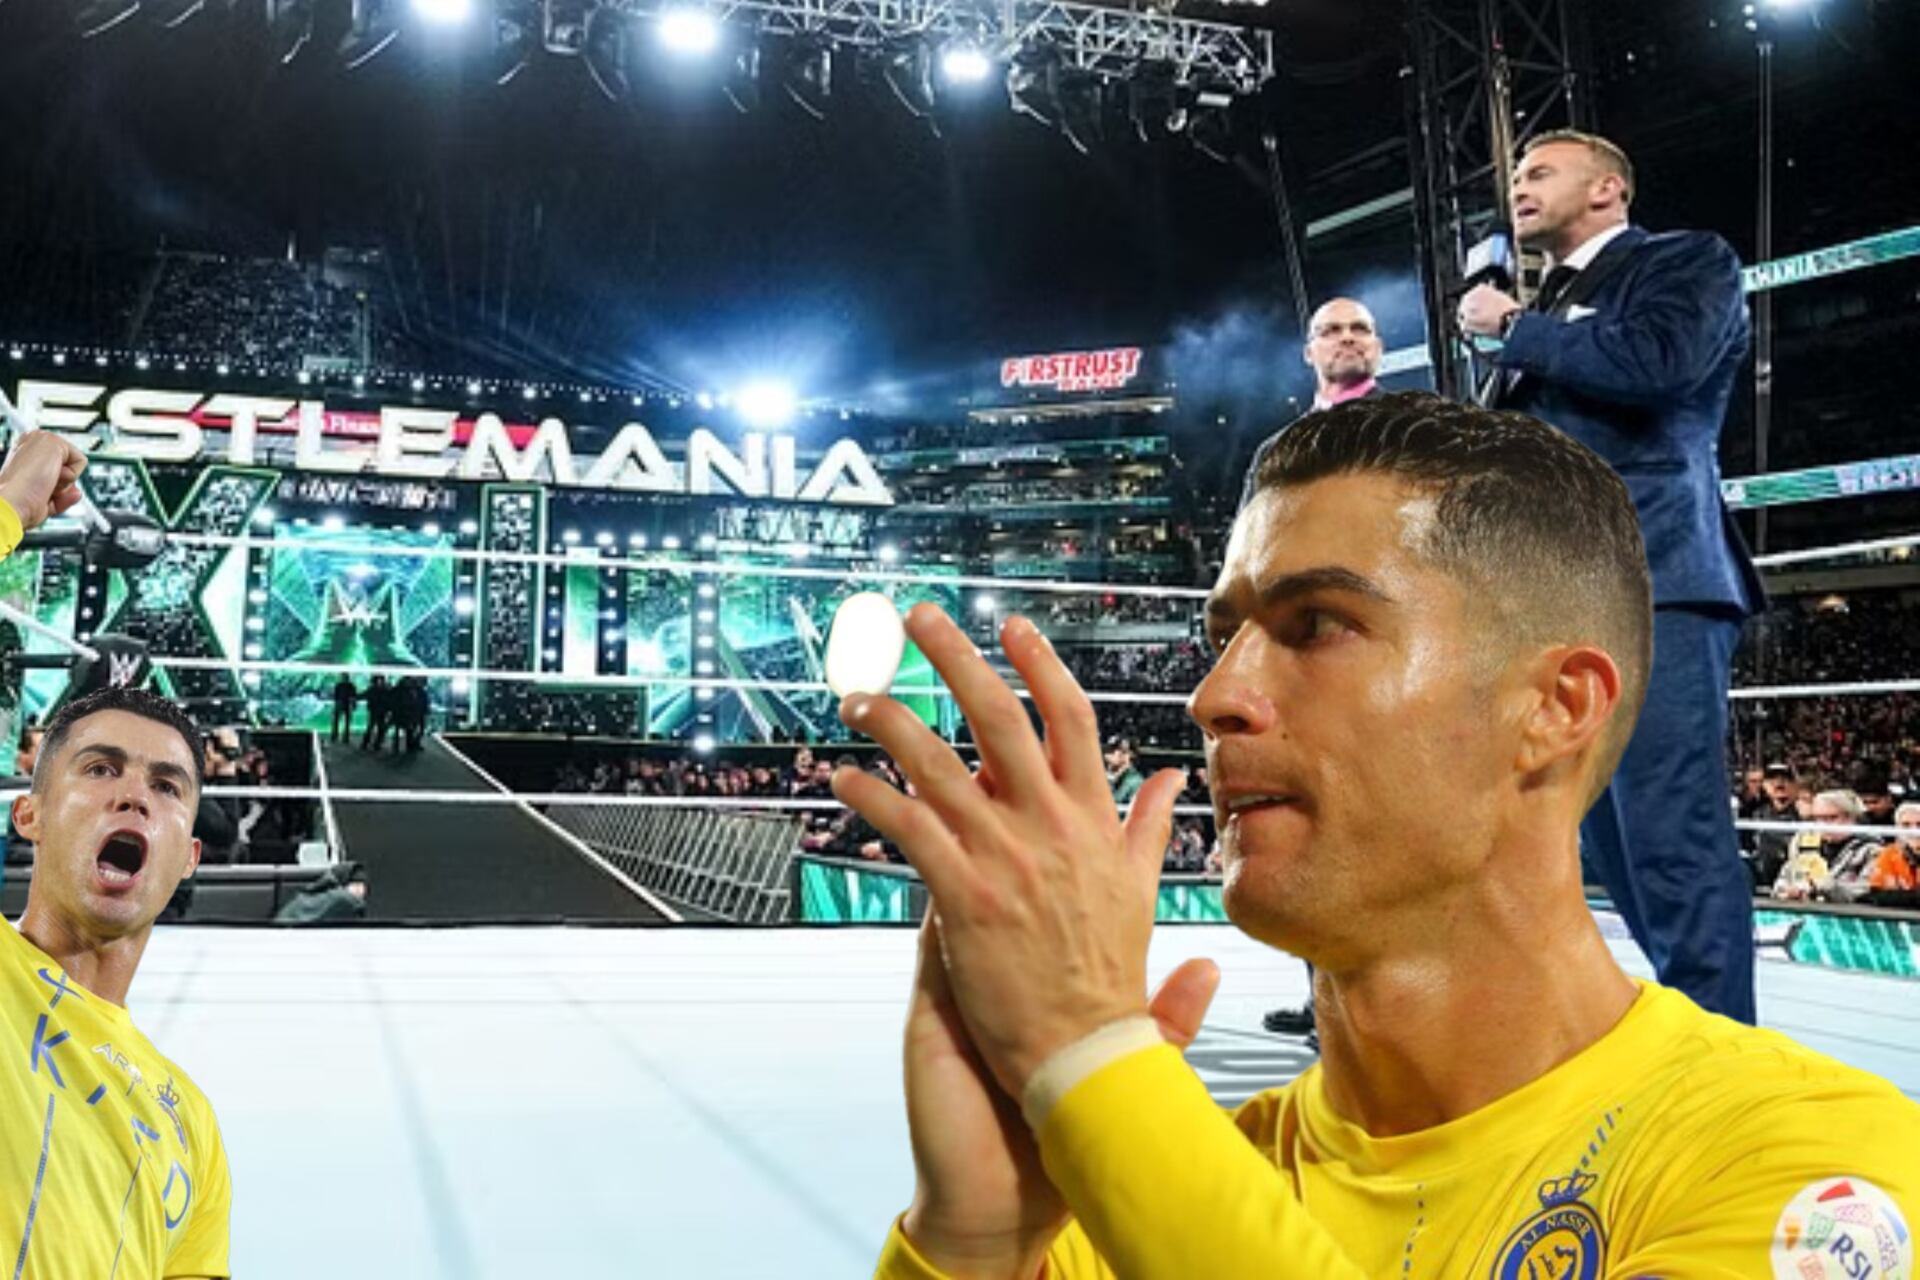 Cristiano at Wrestlemania? The influence Ronaldo had in the huge WWE event